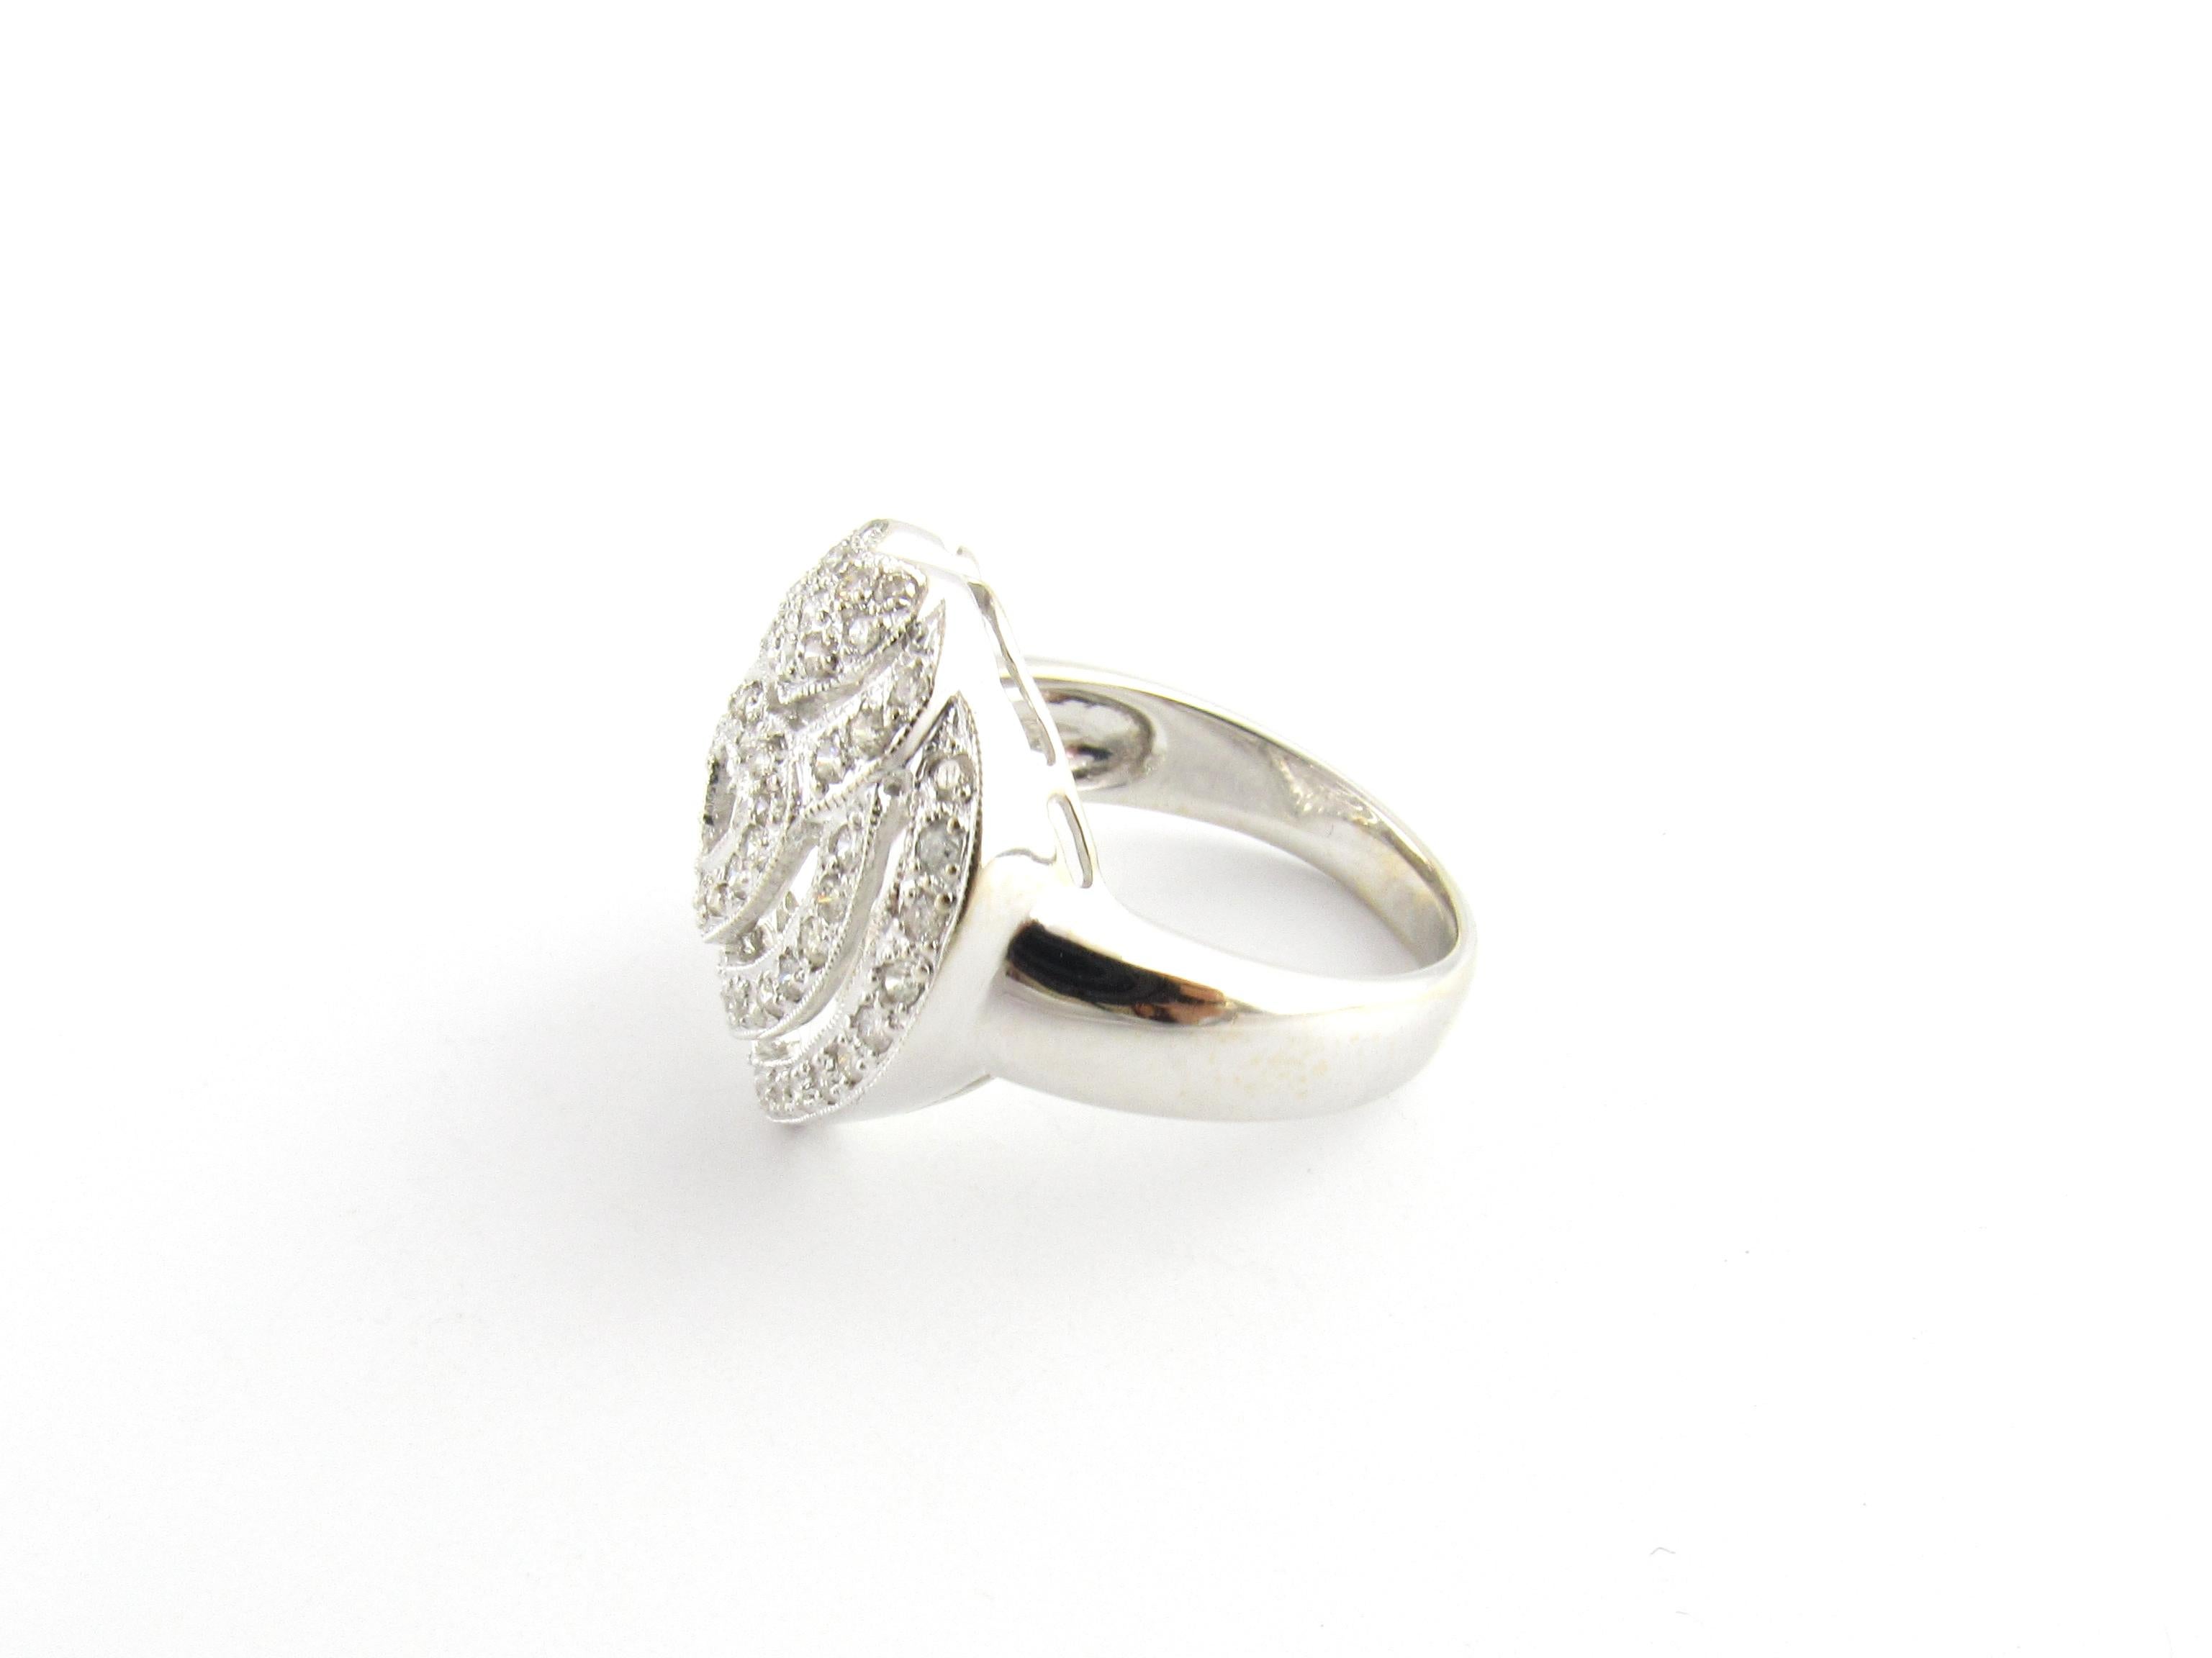 Vintage 18 Karat White Gold Diamond Heart Ring Size 7

This sparkling ring features 64 round brilliant cut diamonds set in a lovely heart design. Top of ring measures 20 mm x 18 mm. Shank measures 3 mm.

Approximate total diamond weight: .64